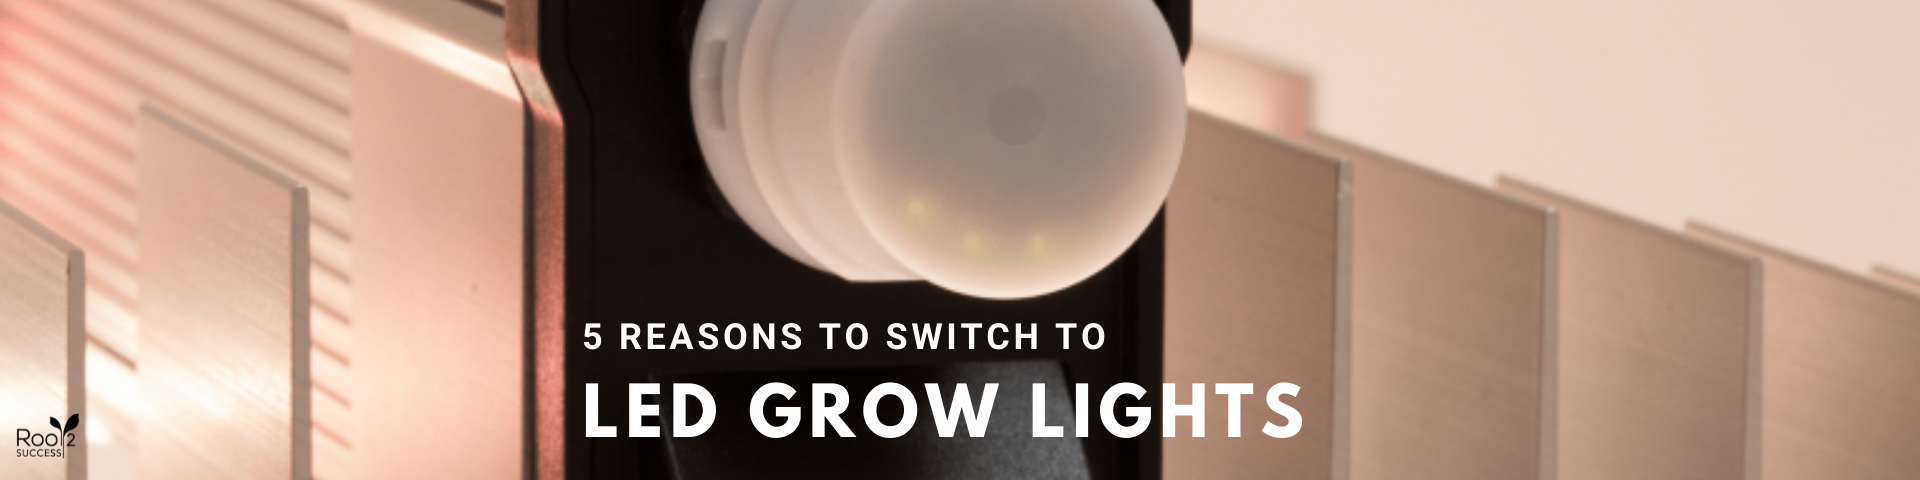 5 reasons to switch to LED grow lights